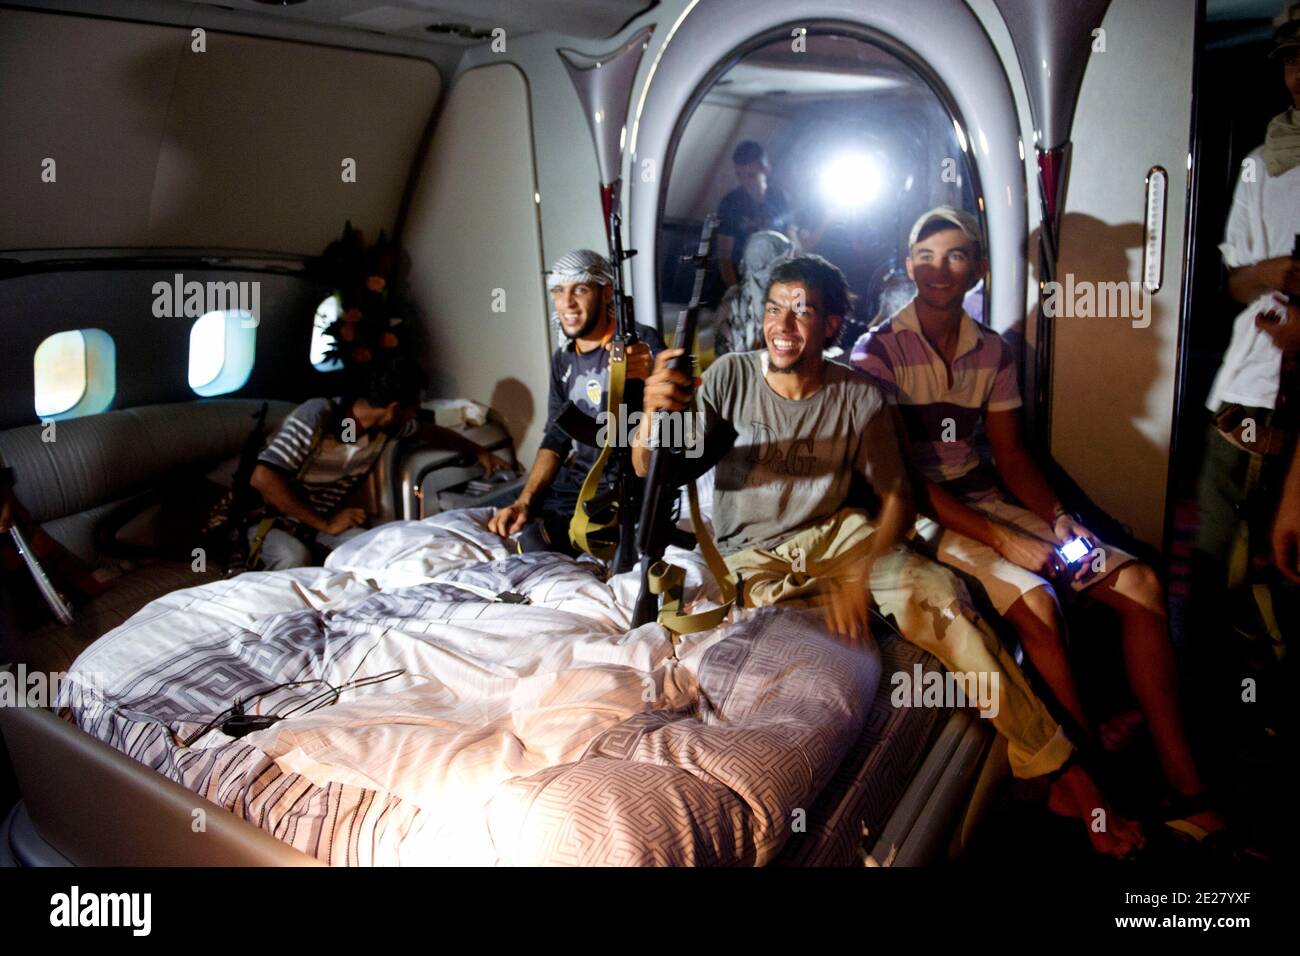 Libyan rebels get on board Afriqiyah airlines Airbus A-340 '5A-ONE' that belongs to their leader Muammar Gaddafi and discover the luxury of the revolutionary leader, at Tripoli International Airport, near Tripoli, Libya, on August 29, 2011. Photo by Ammar Abd Rabbo/ABACAPRESS.COM Stock Photo